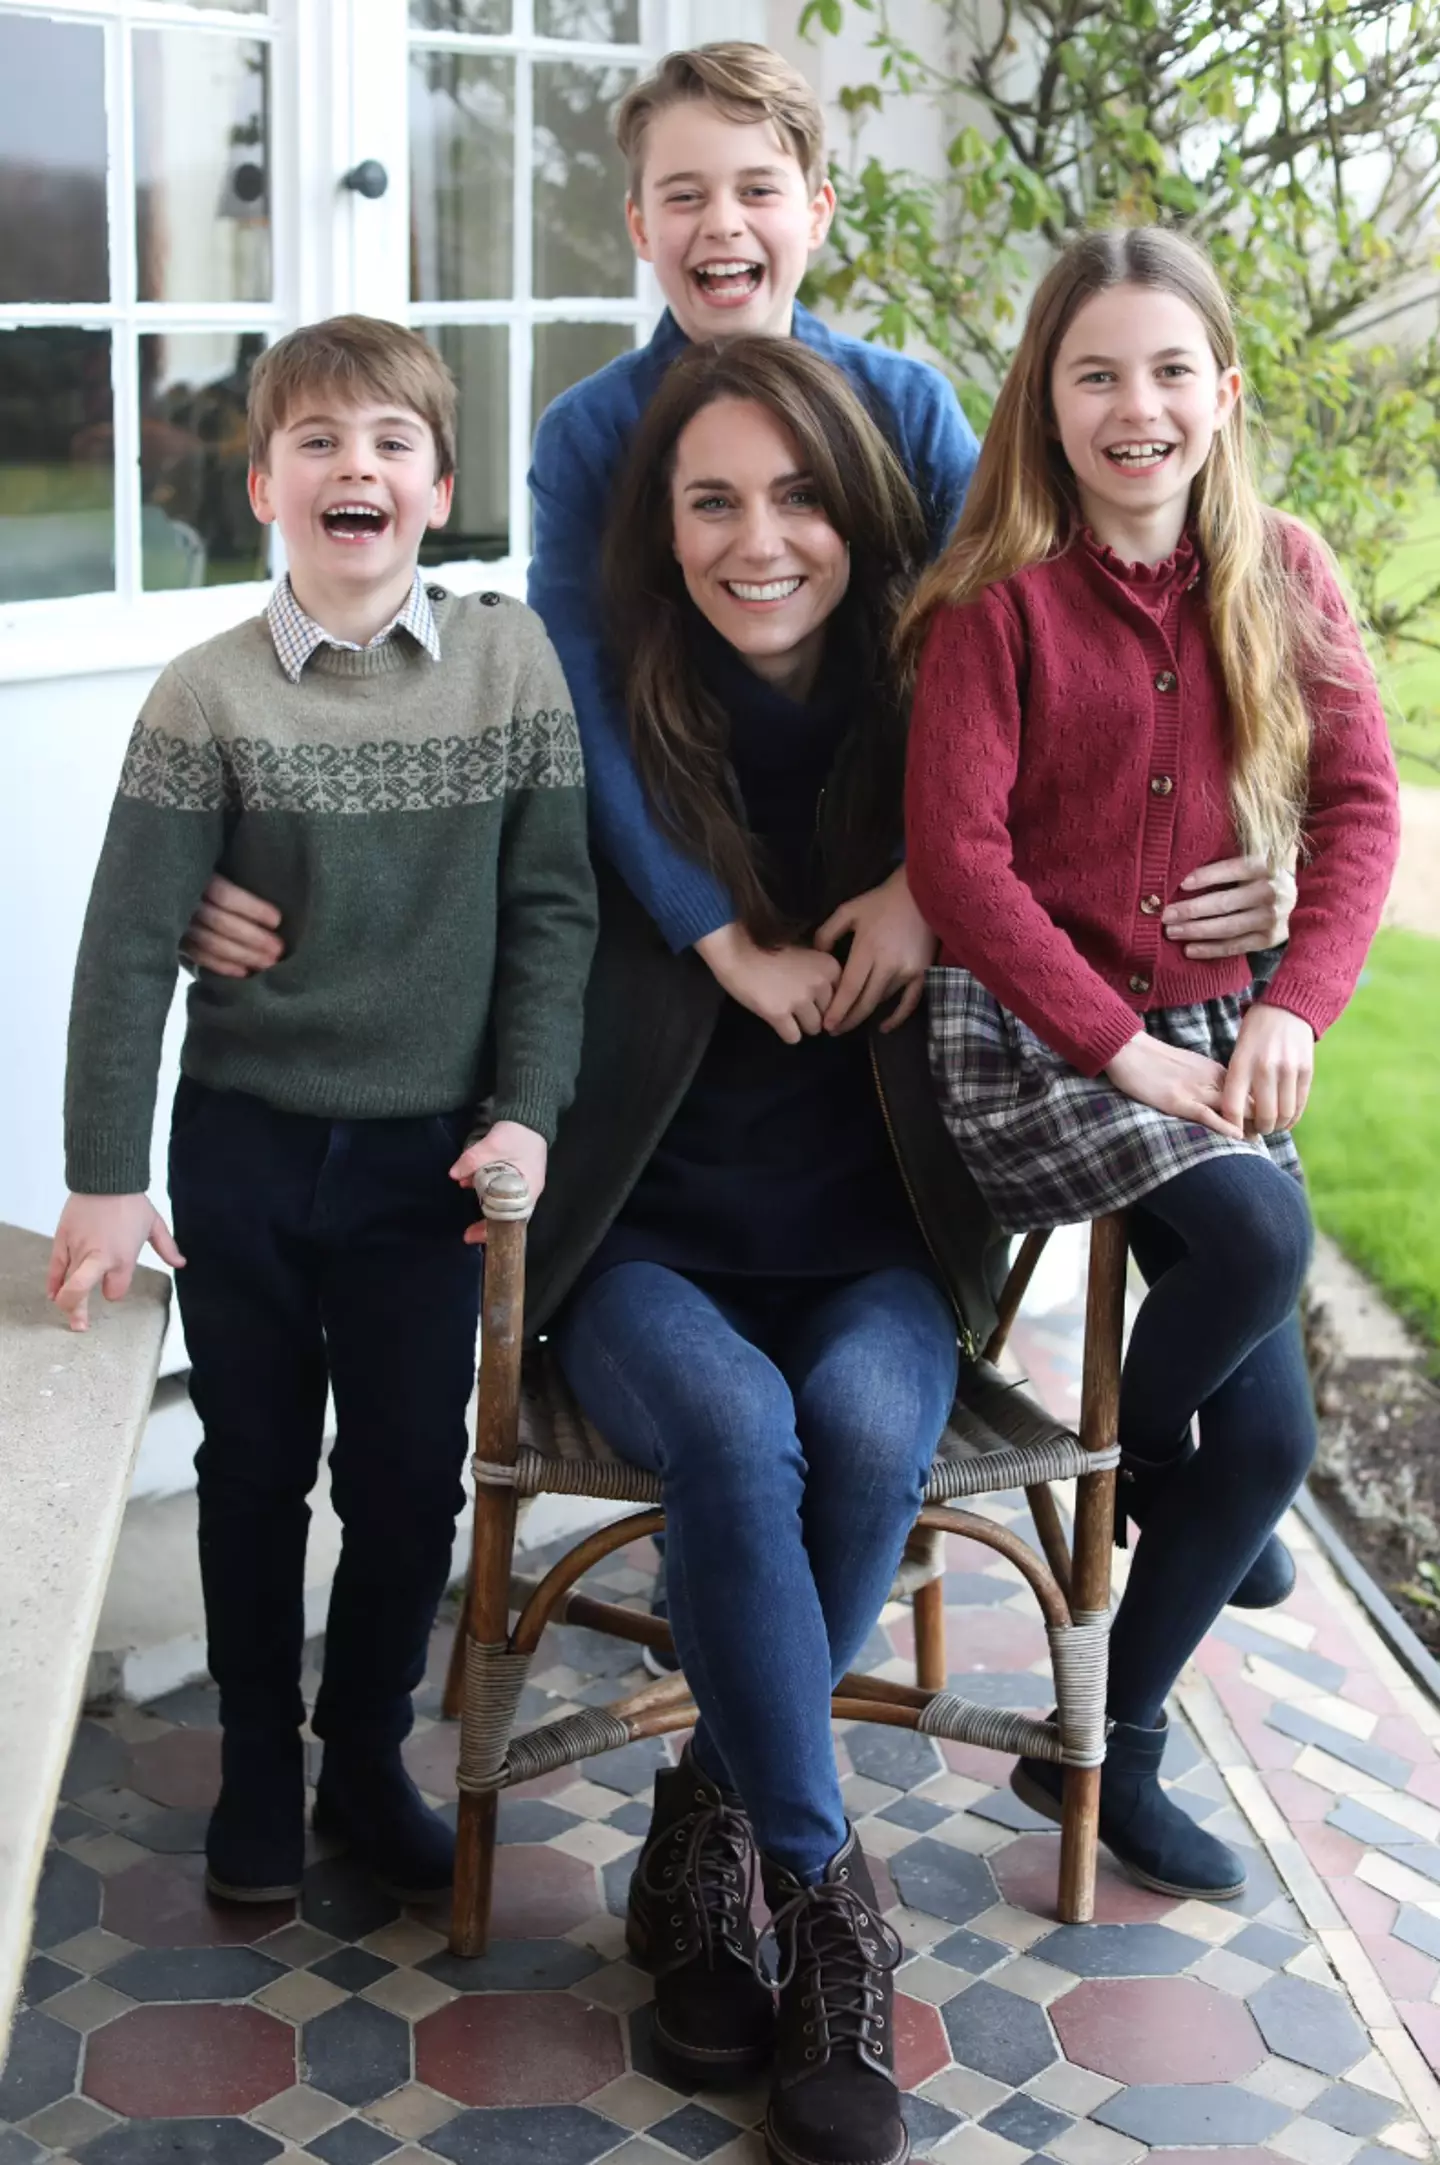 On Sunday, Kensington Palace posted the first picture of Kate Middleton with her children for Mother's Day.